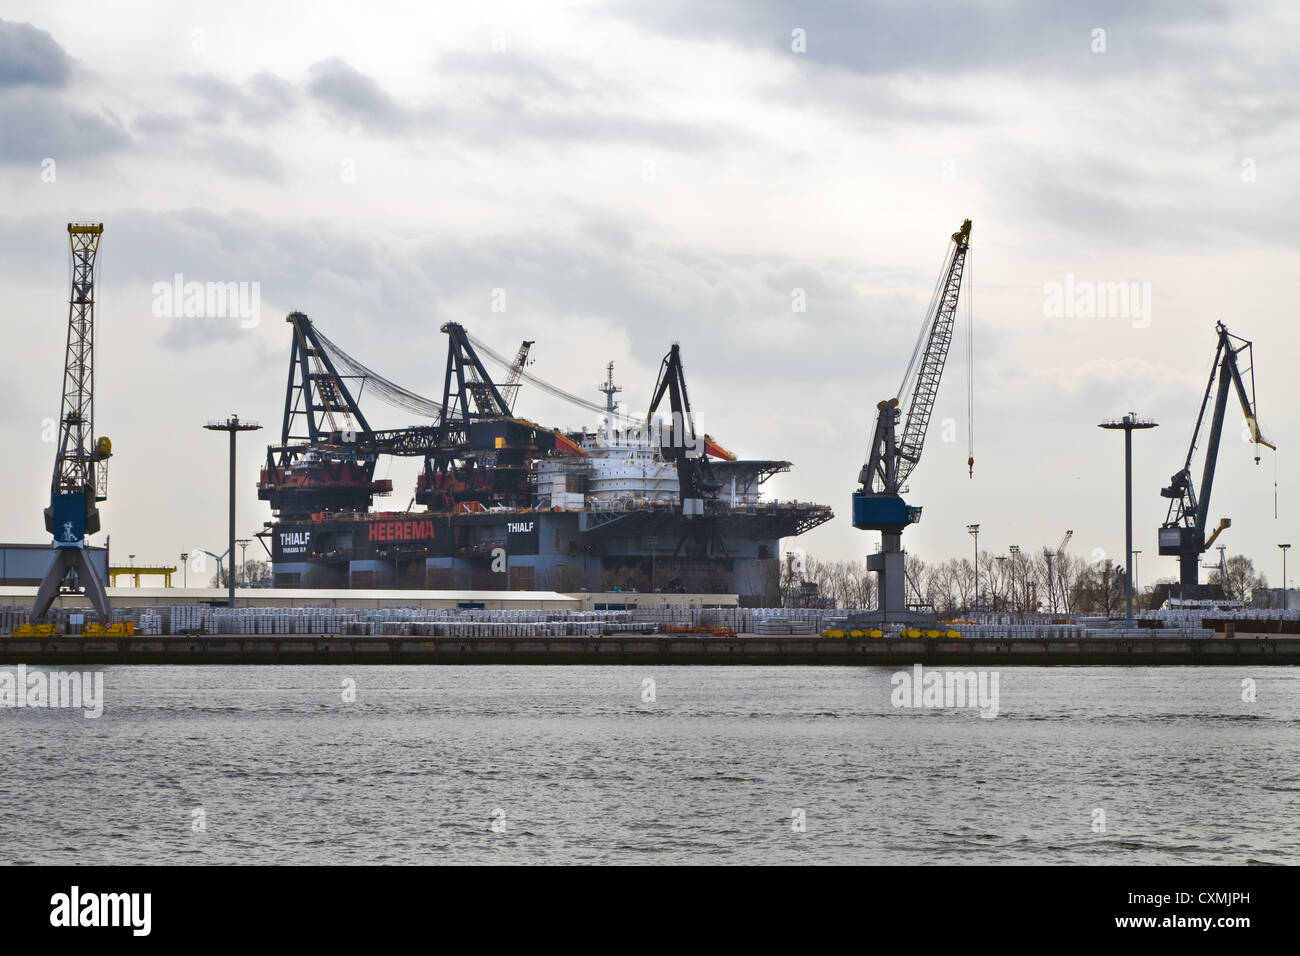 Worlds biggest semi-Submersible Crane Vessel Thialf for repair in dock at Verolme, the Netherlands Stock Photo